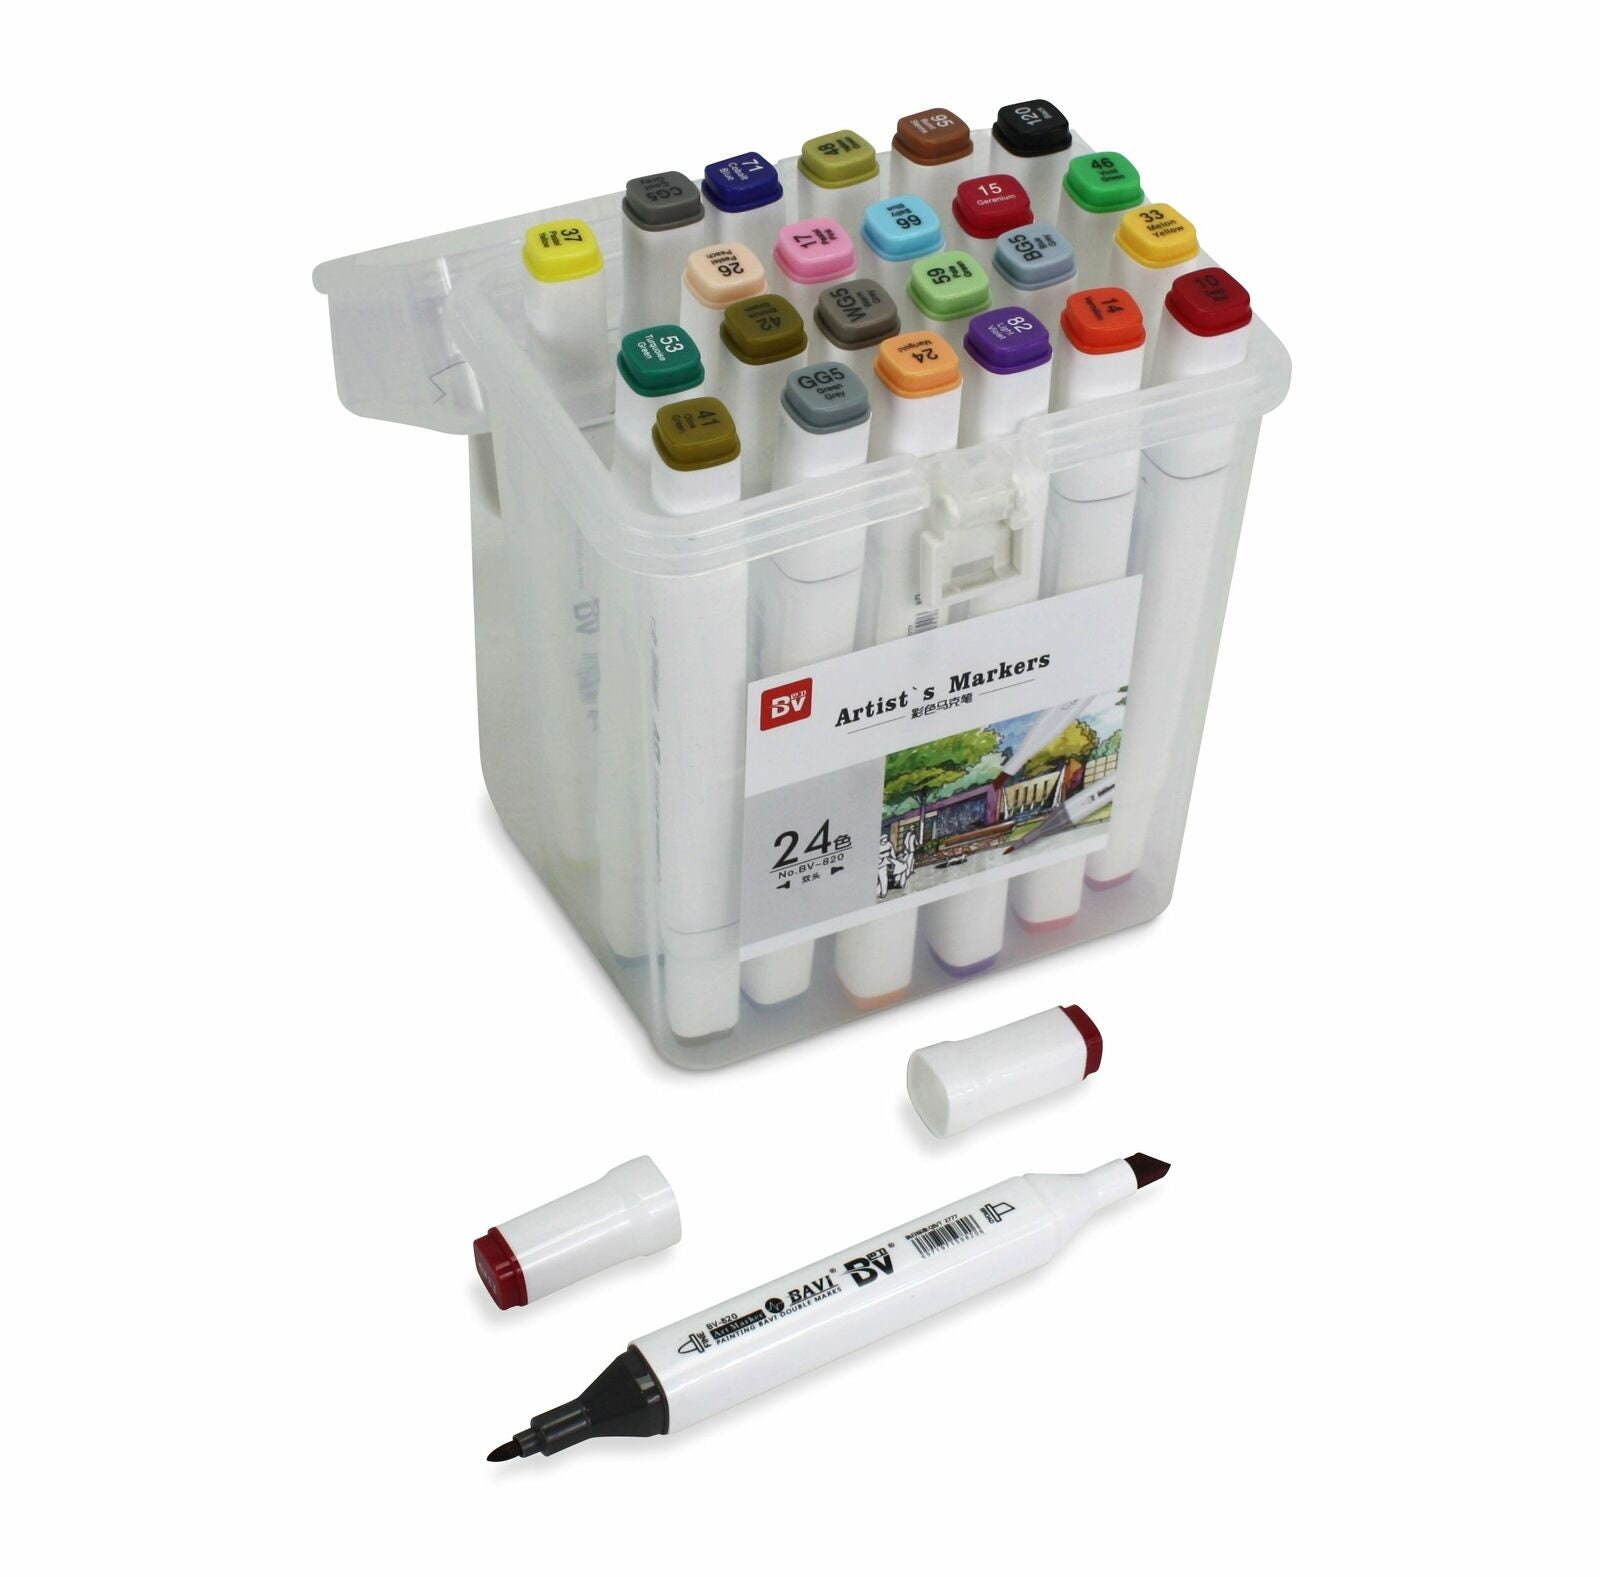  ALI'S ART MARKERS, Alcohol Markers, Dual Tip Double Ended  Marker, 60 Colours, Clear Plastic Storage Case, Drawing, Sketching : Arts,  Crafts & Sewing